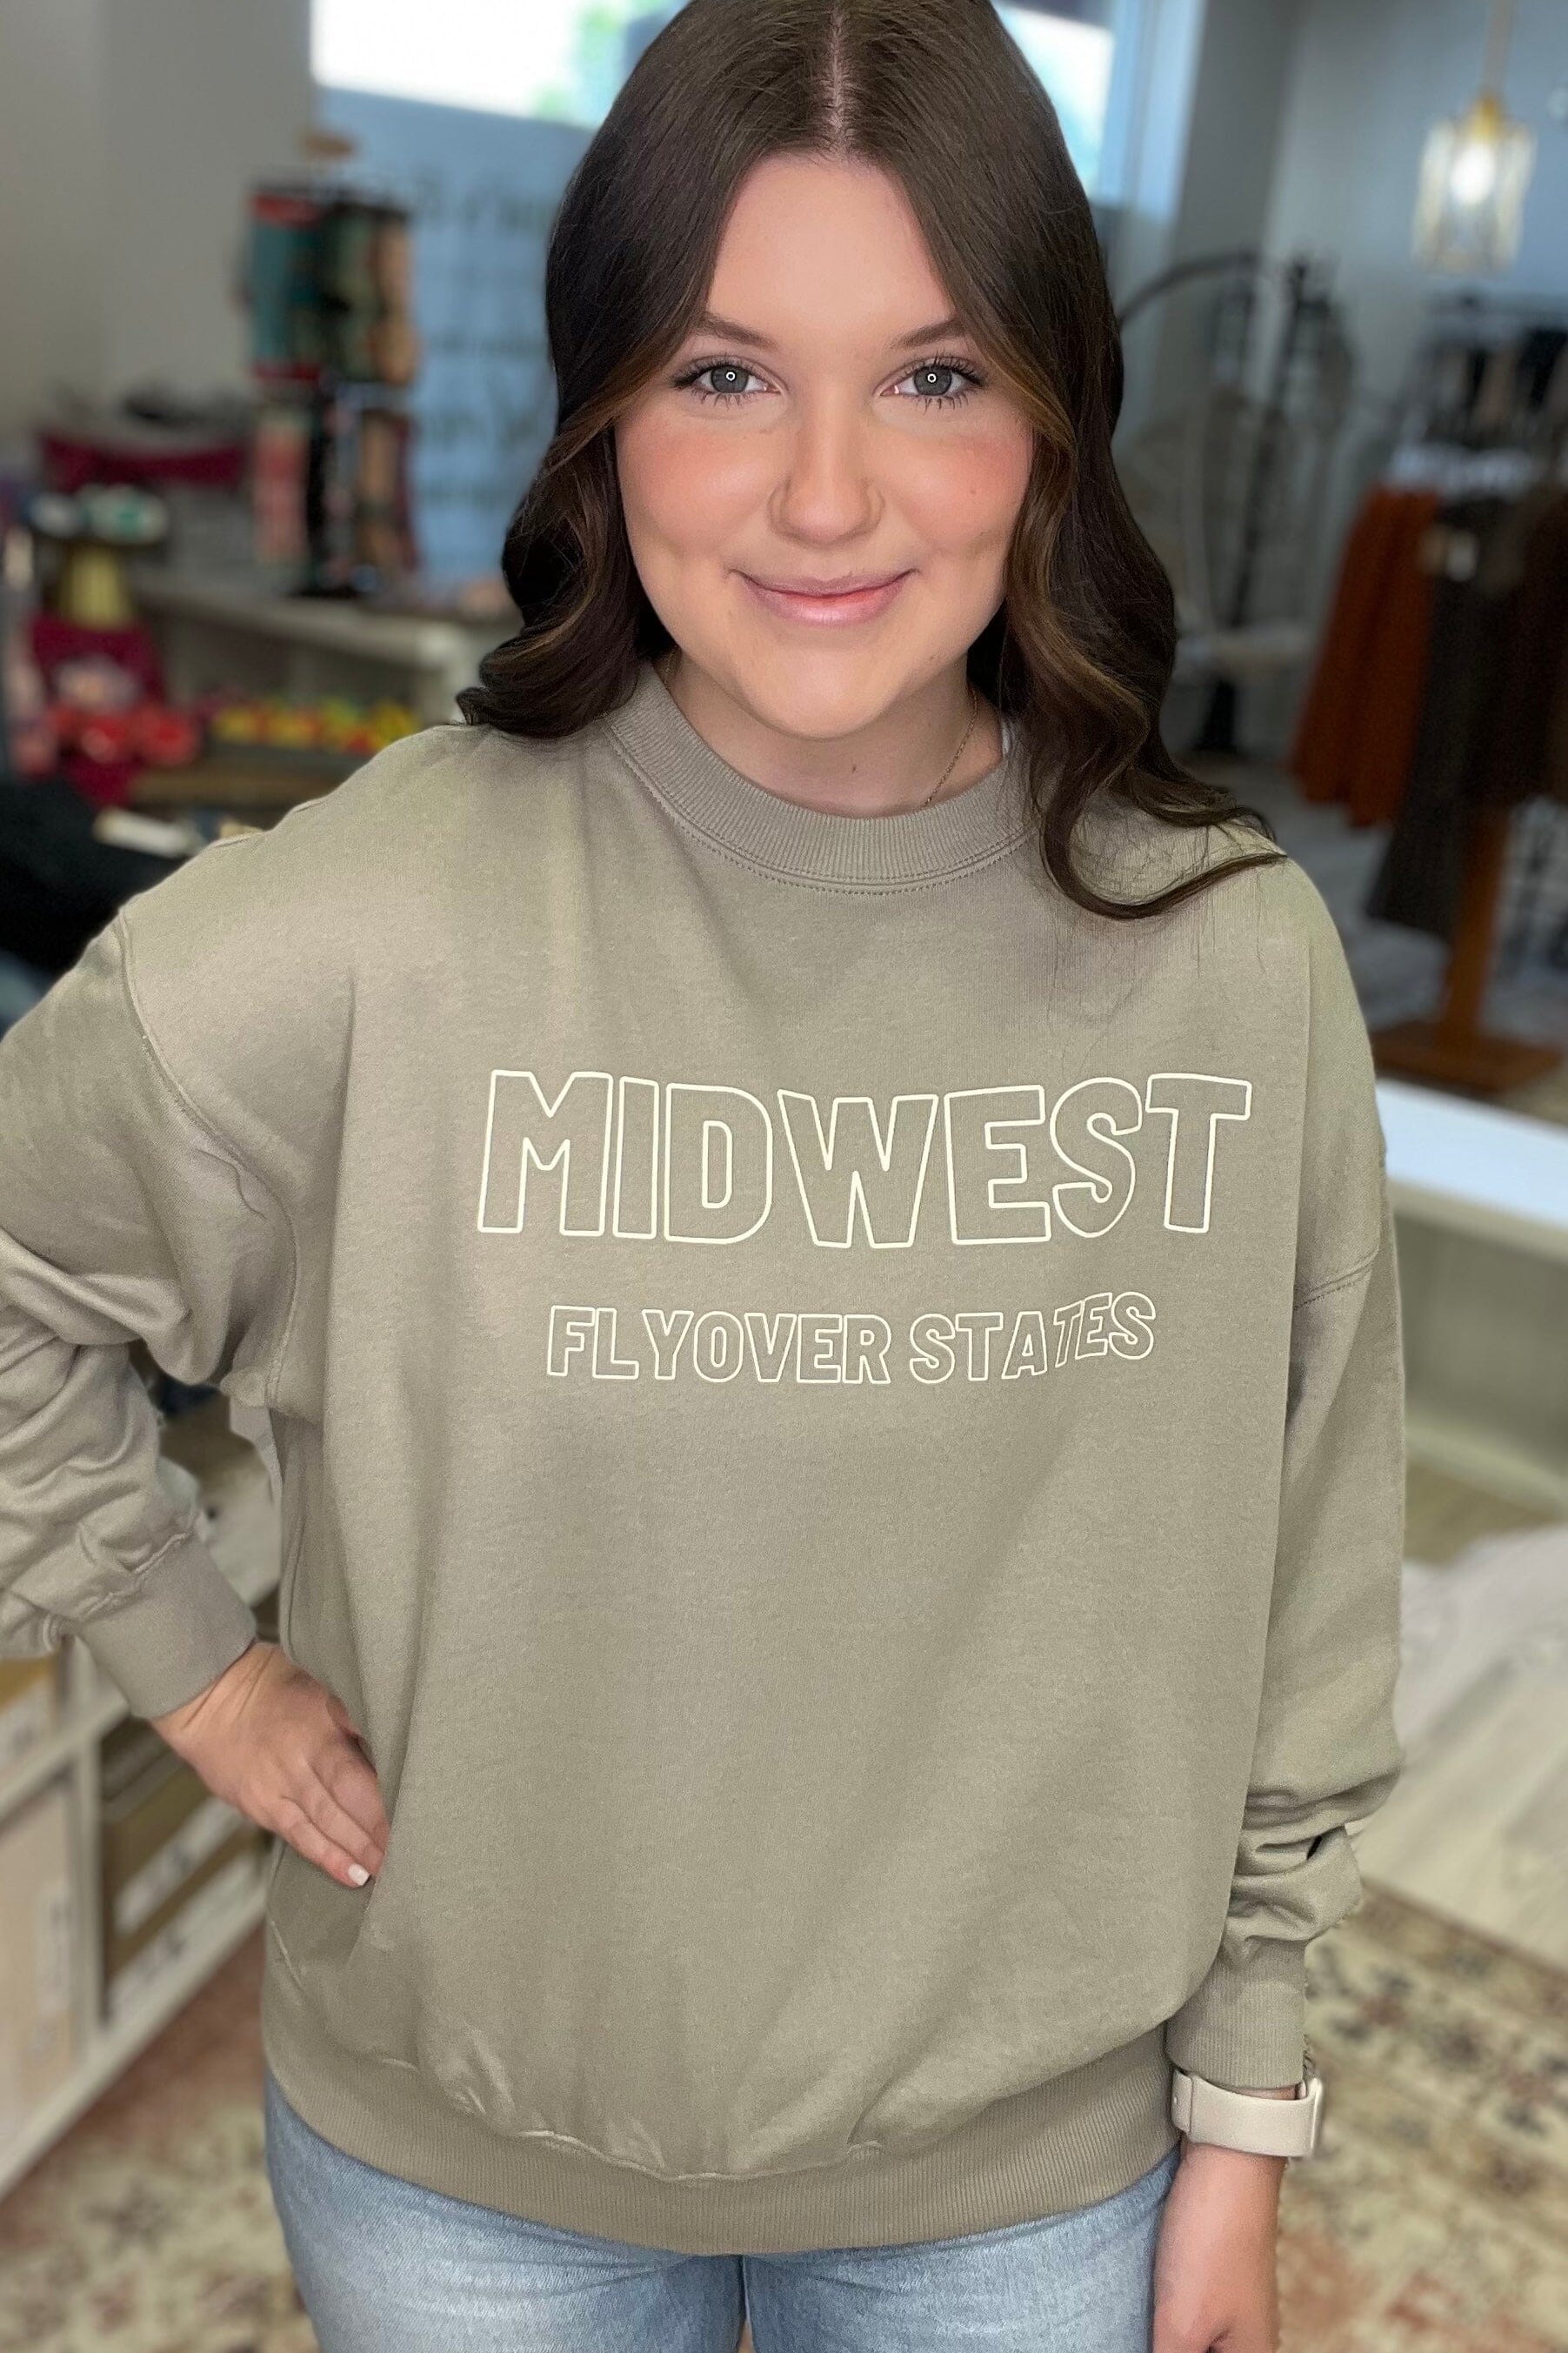 Midwest Flyover States Sweatshirt JRTOP CASUAL TOP K Lane's & Co. 